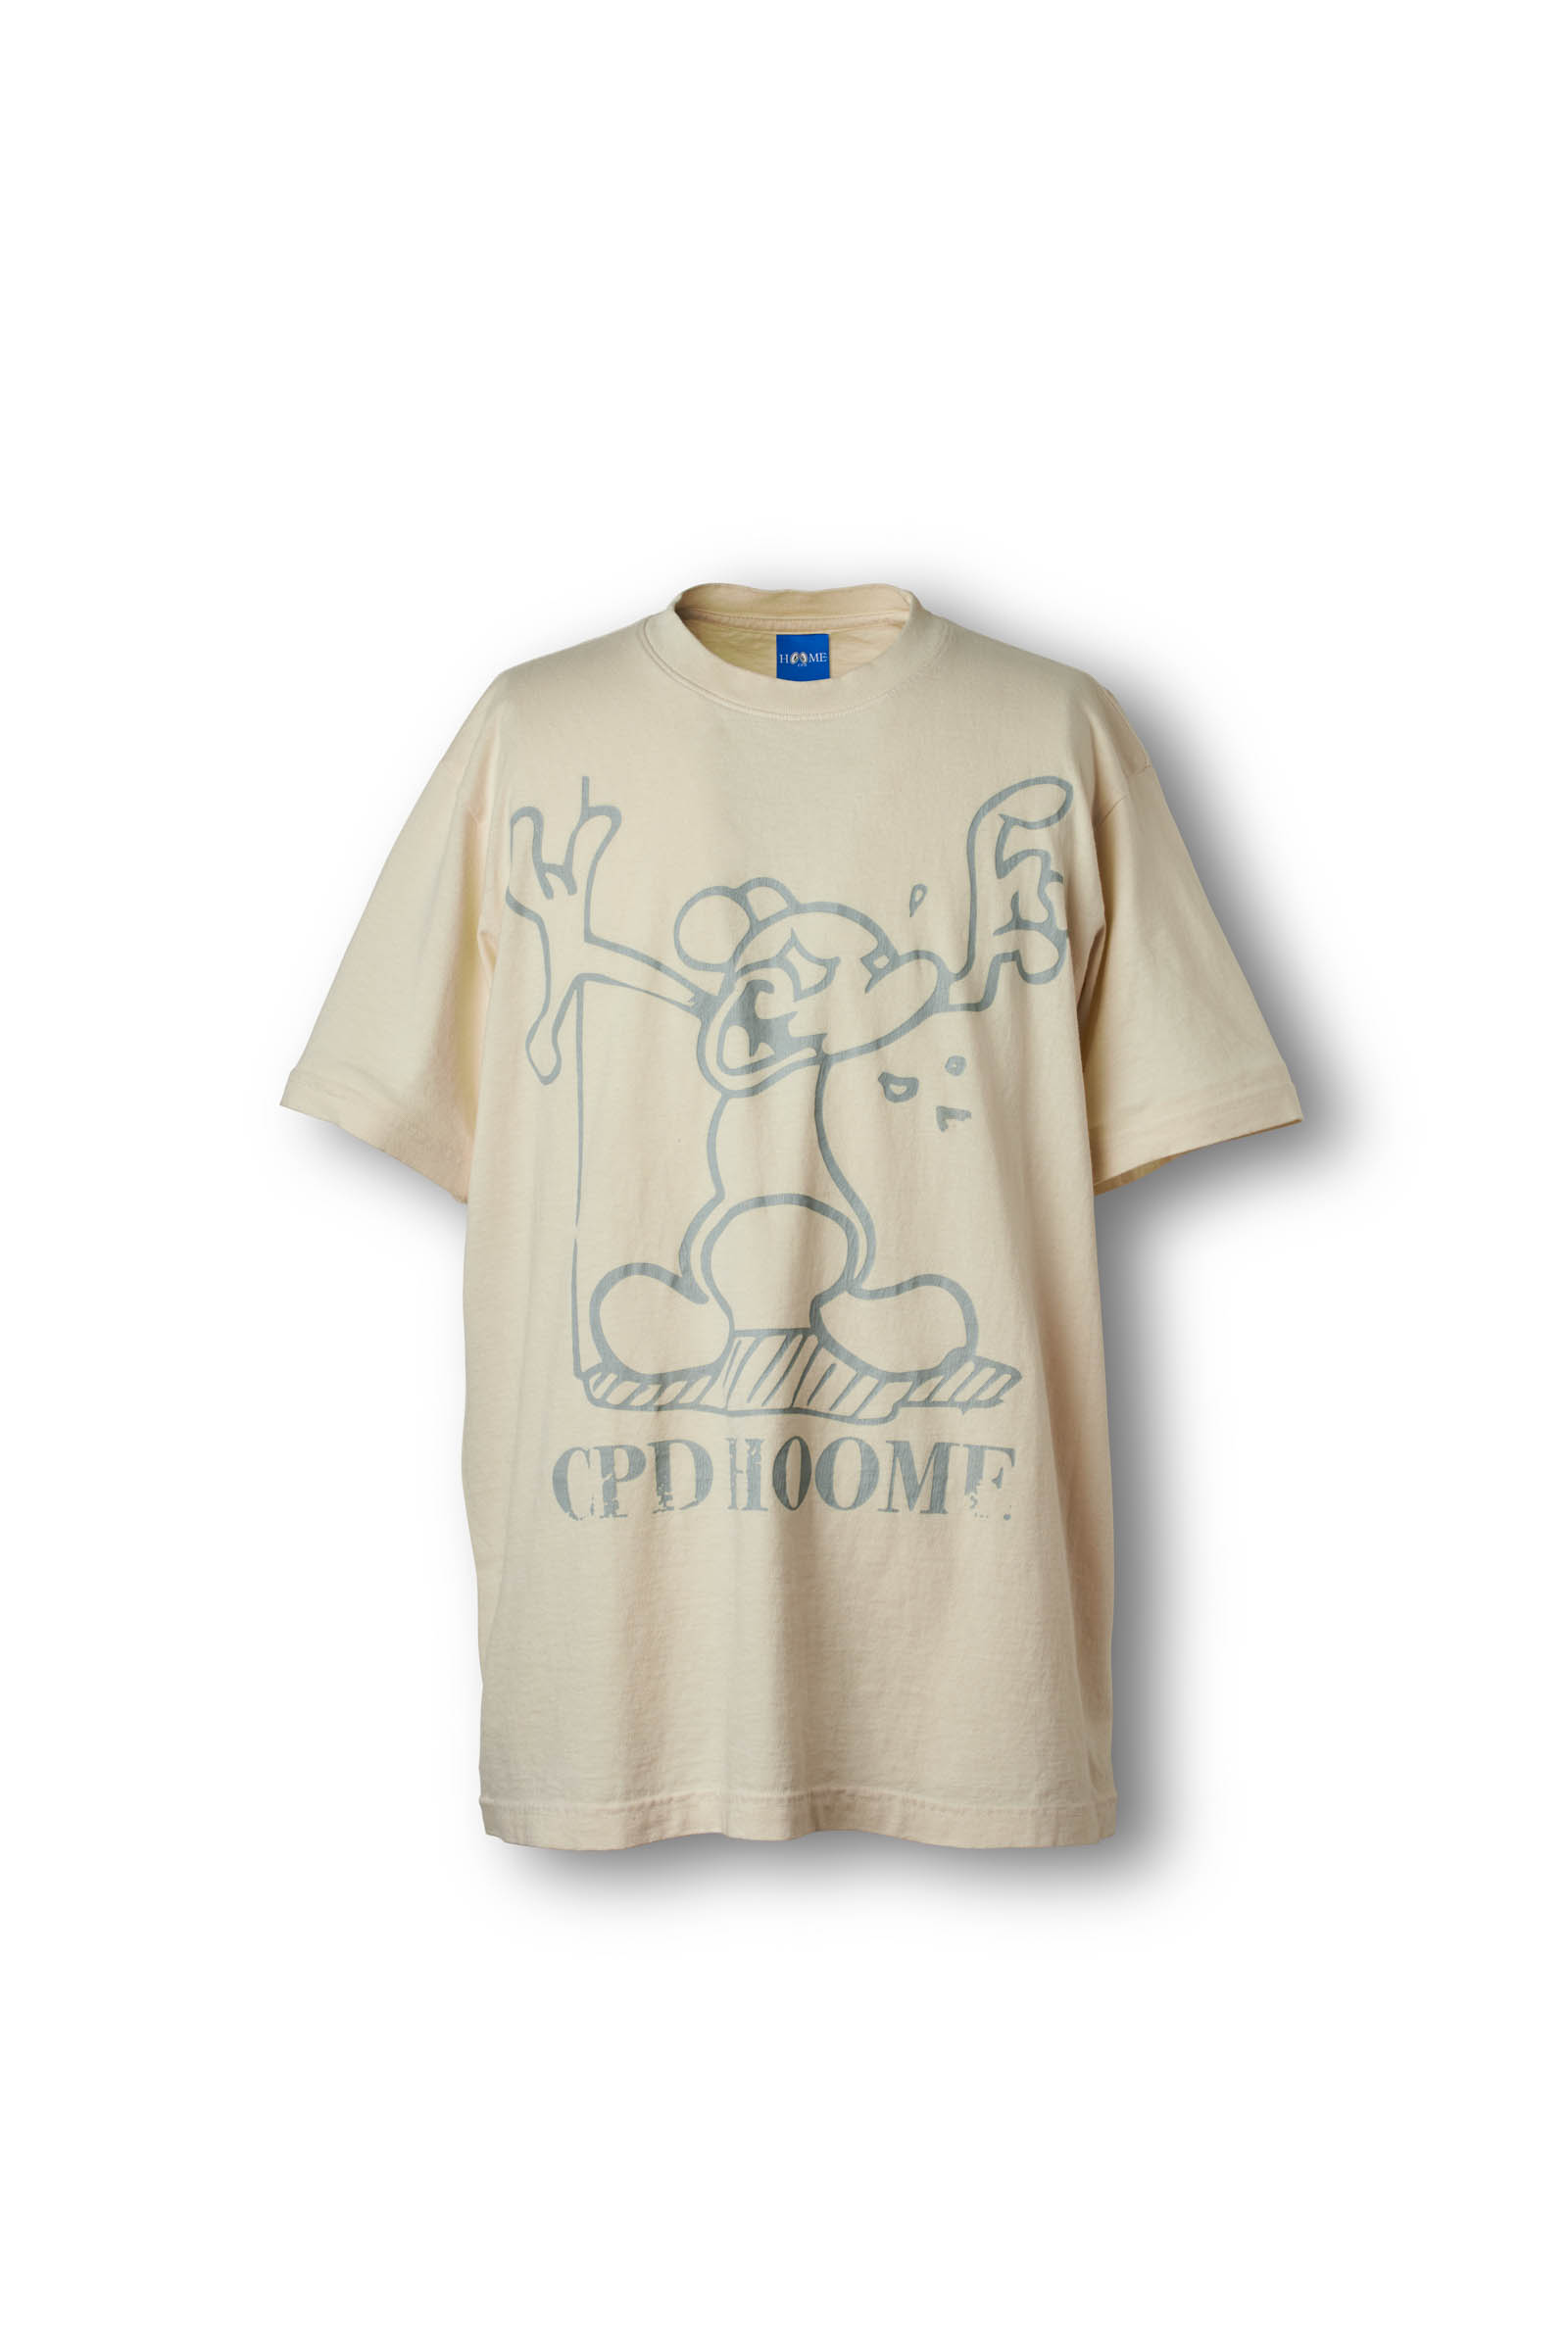 COIN PARKING DELIVERY 白井さん GR8 限定 Tシャツ-